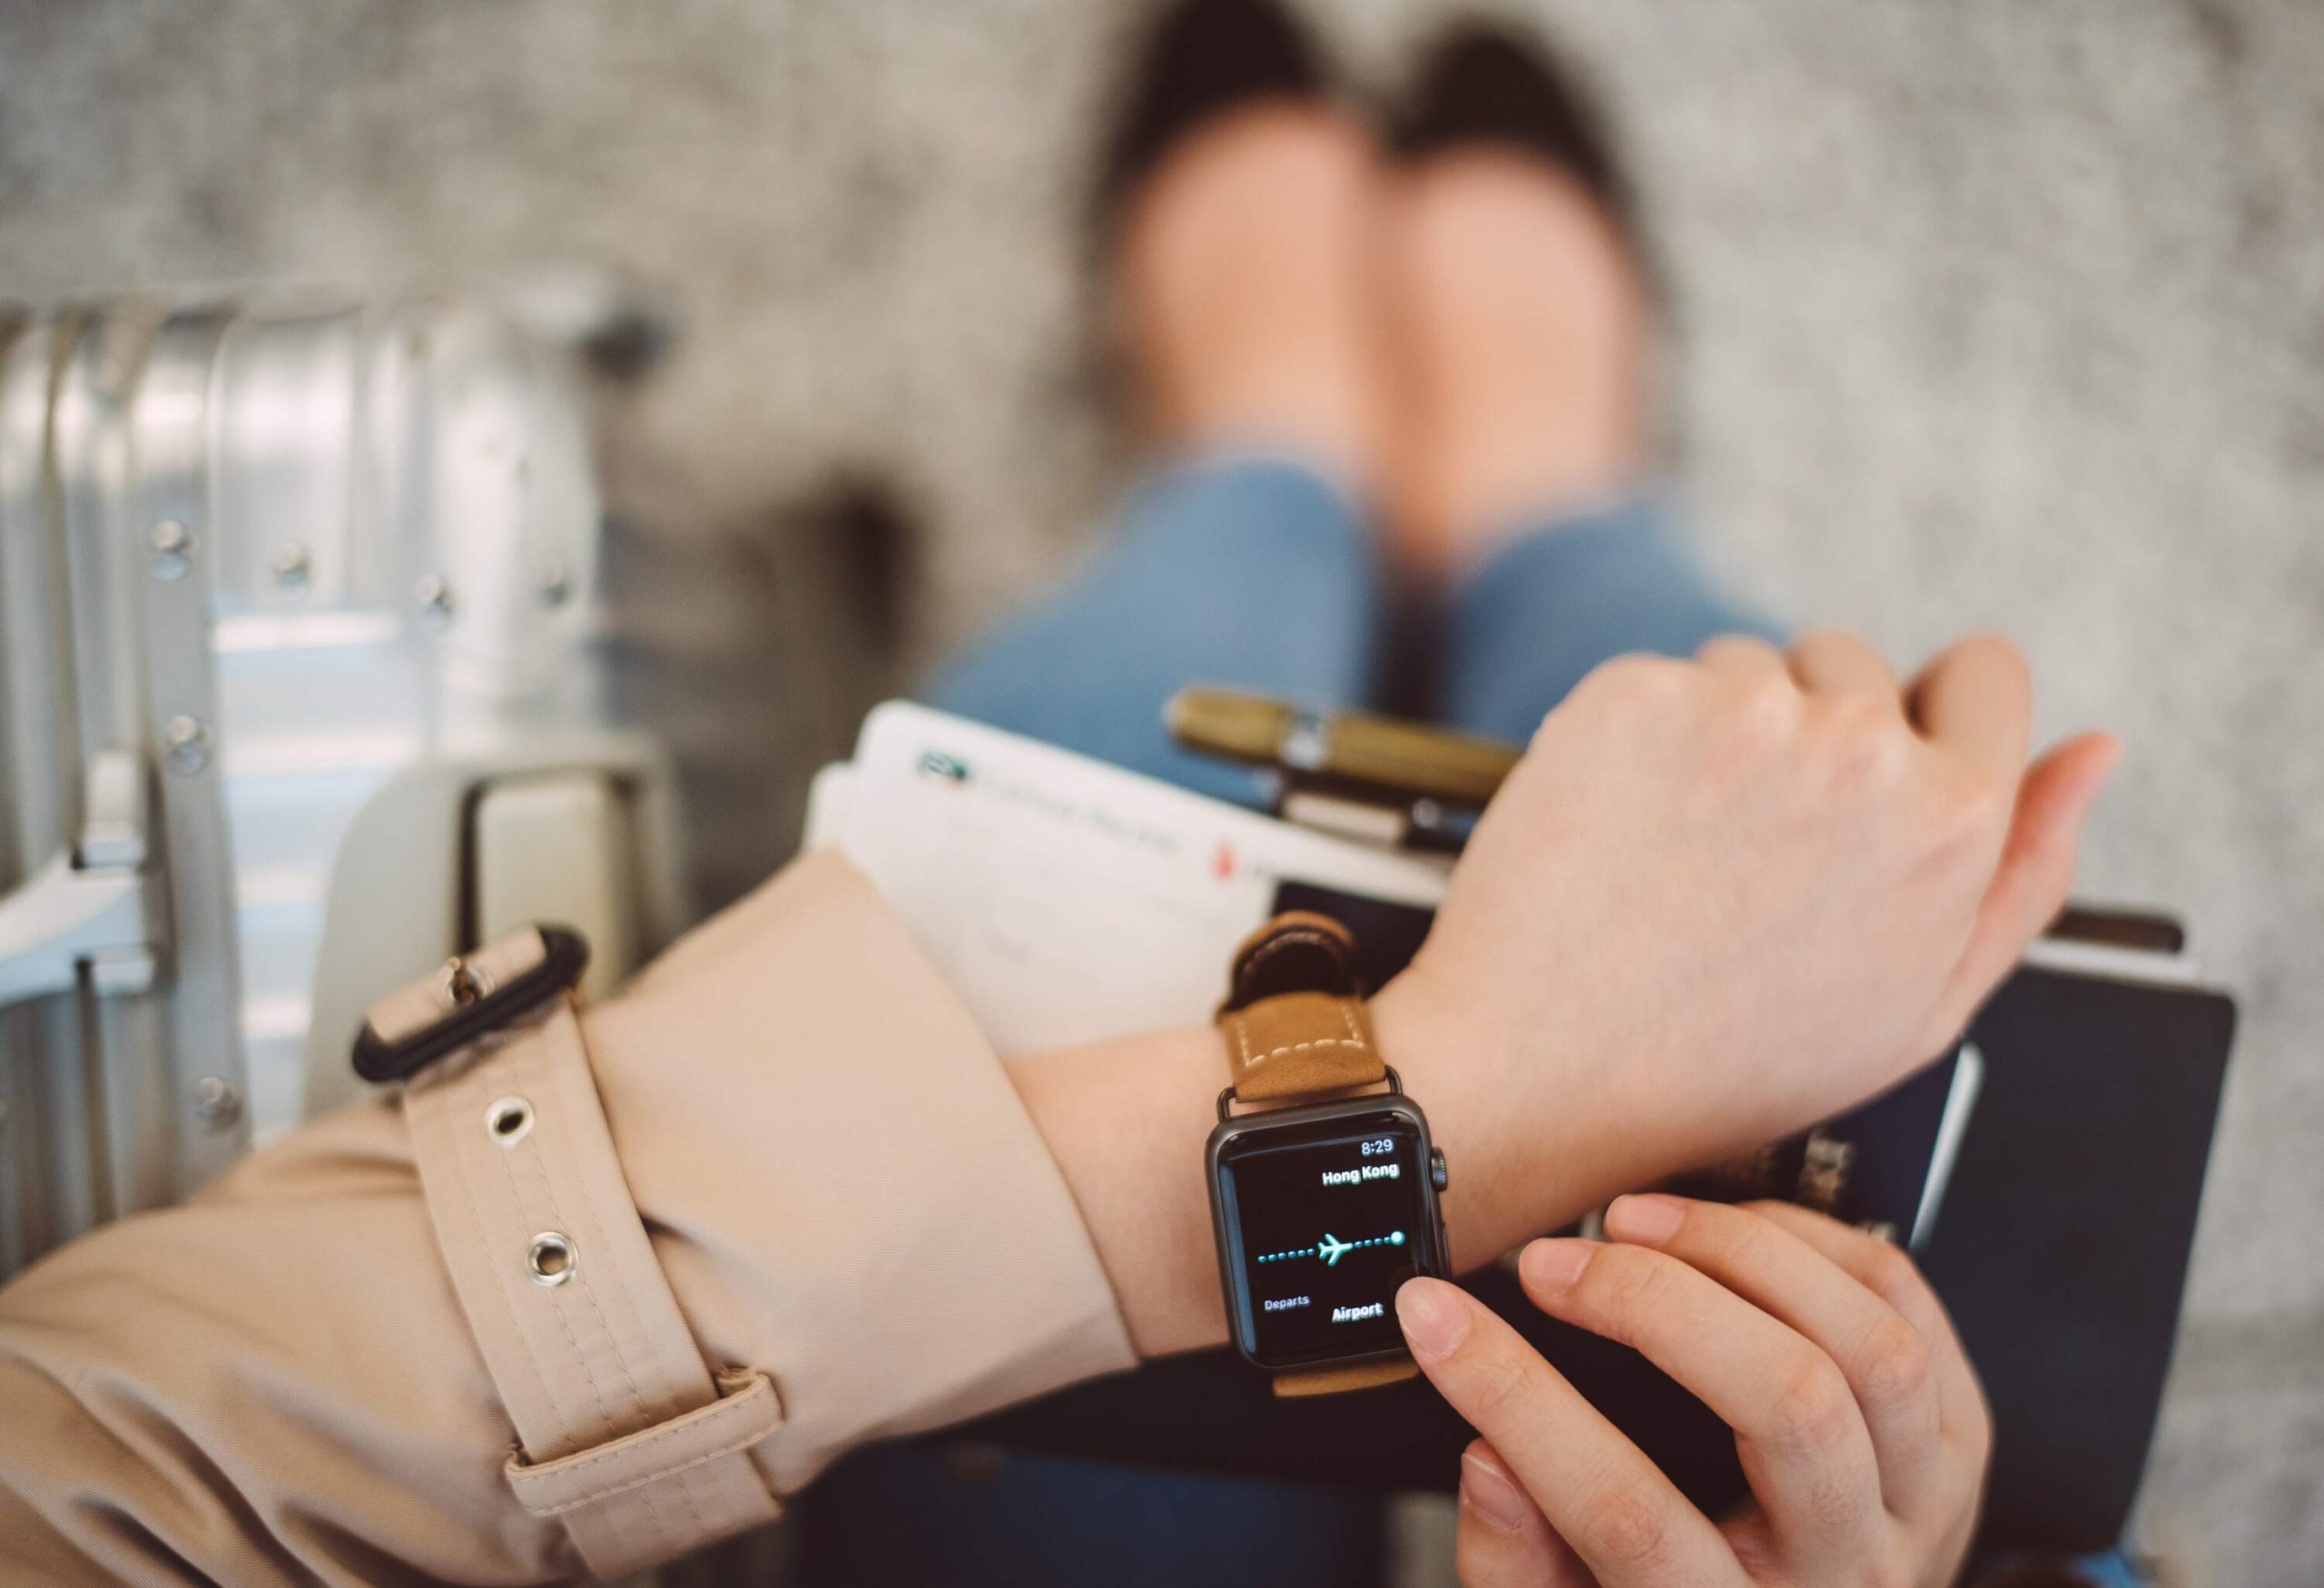 A young lady seamlessly manages her travel plans, glancing at her smartwatch while confidently holding her passport.